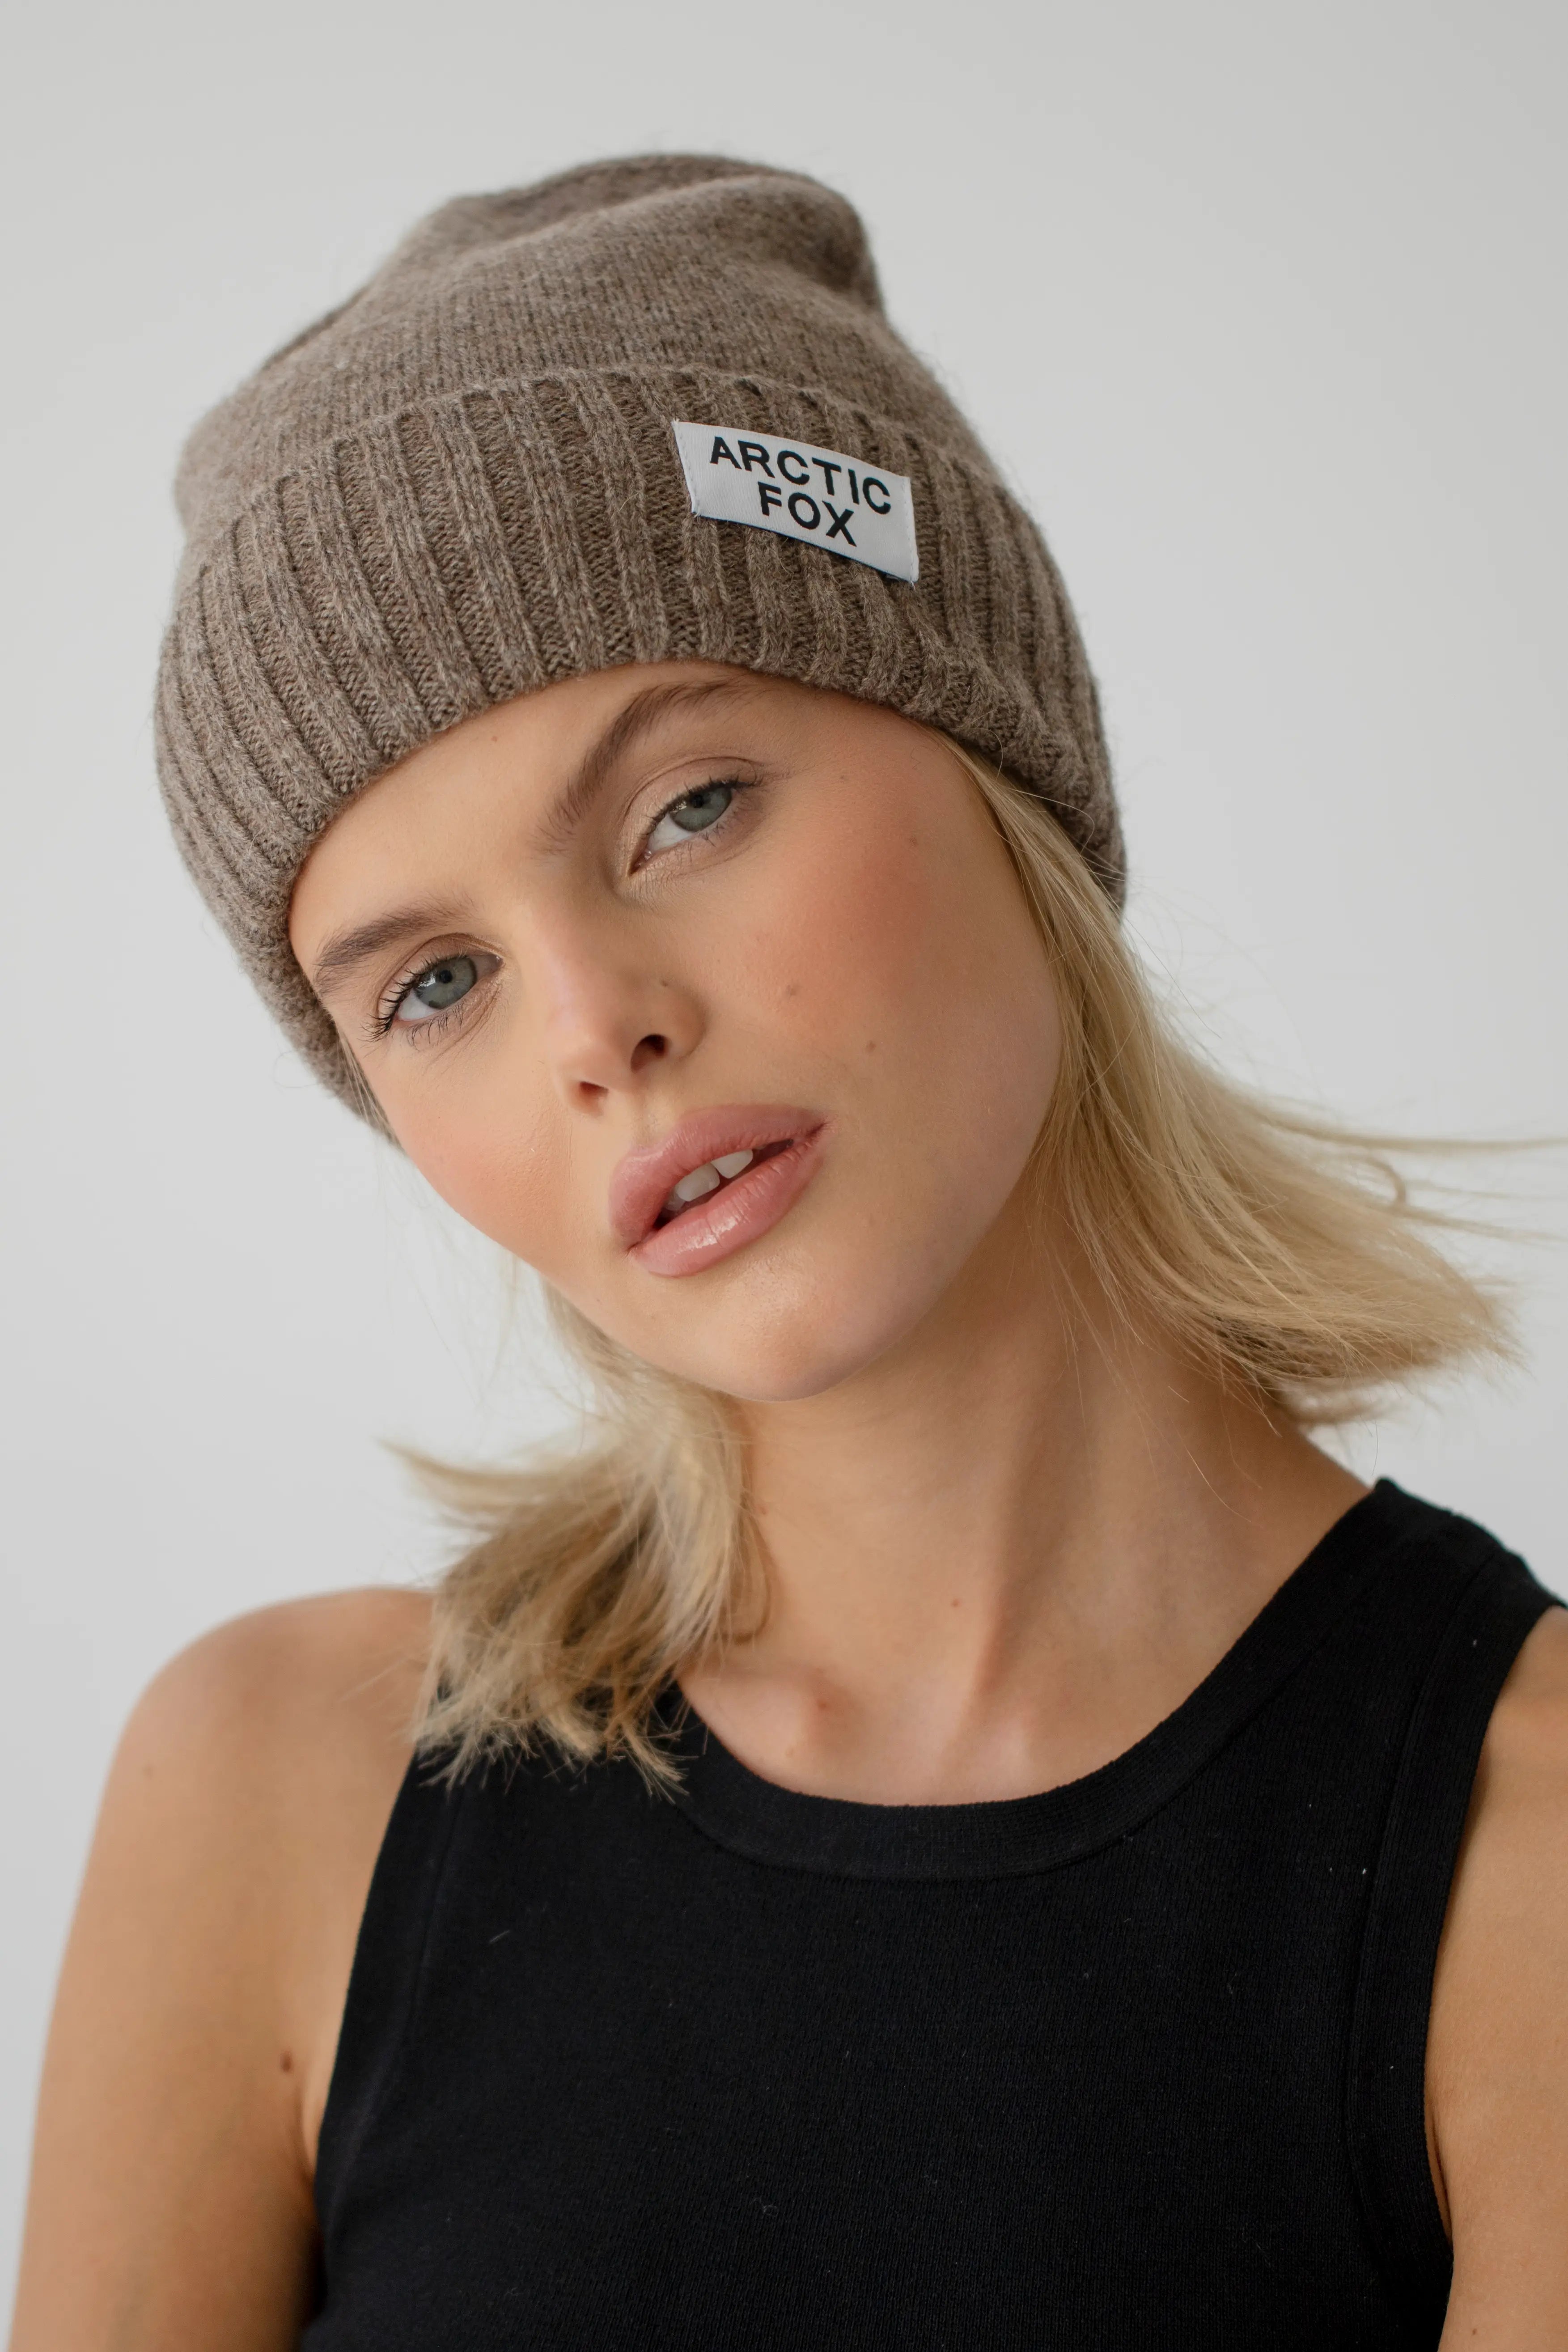 arctic fox and co, made in the UK, Responsible standard wool certified high welfare wool beanie, wolf brown, light brown, oatmeal, womens beanie hat, sustainable and ethical fashion, curate